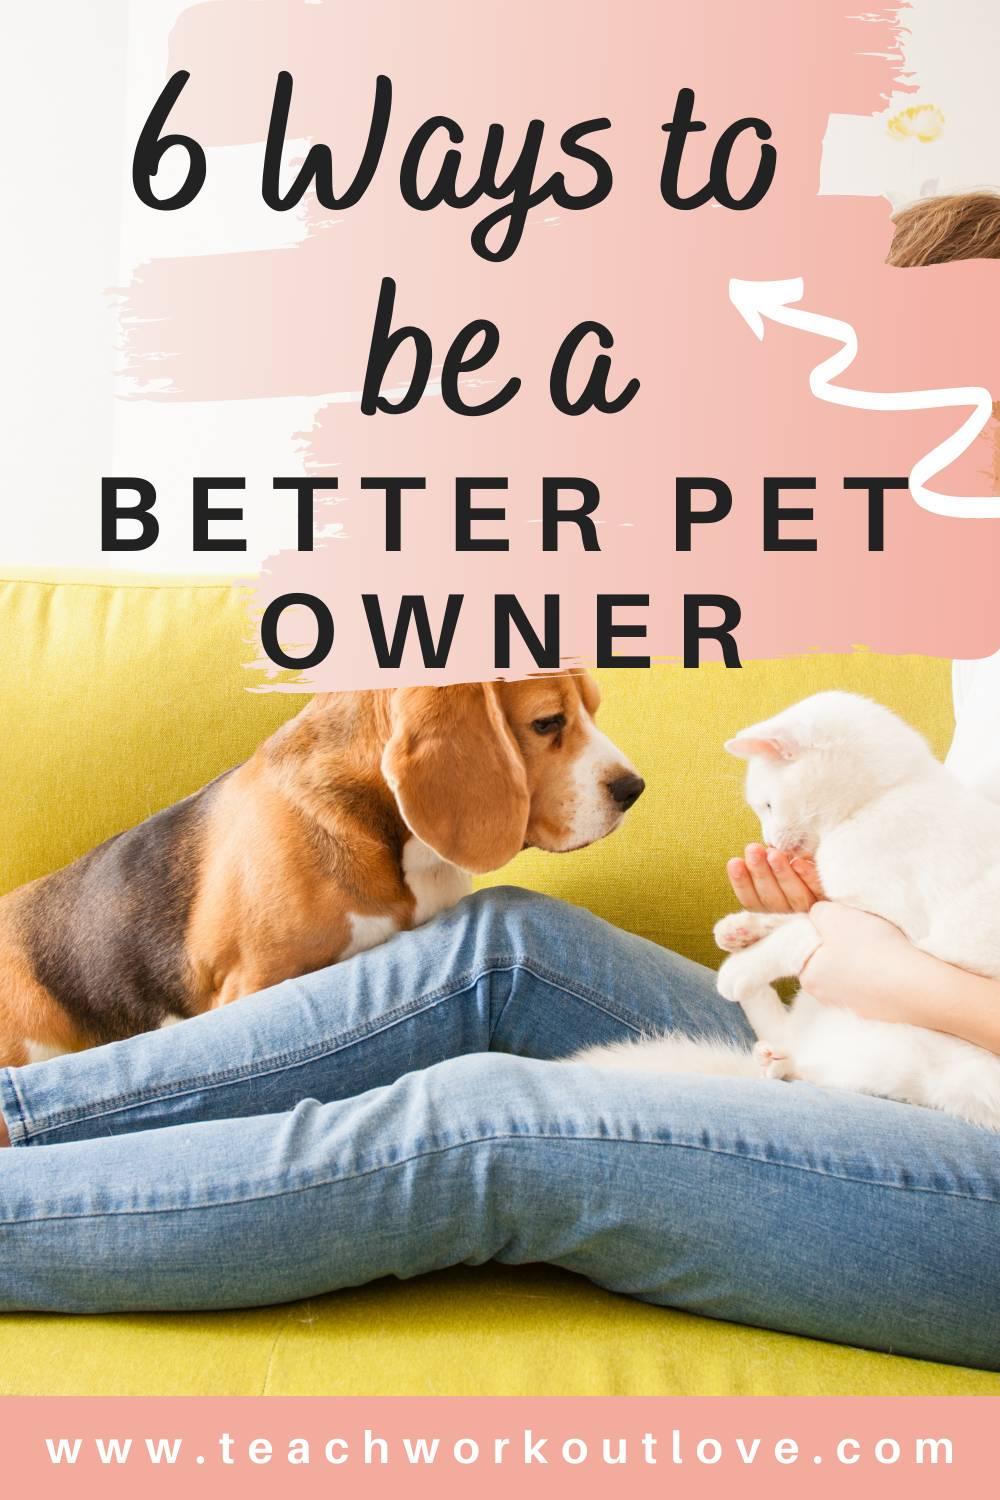 Having a pet sounds exciting and entertaining.But taking care of them is a big responsibility.Here's tips that'll help you be a better pet parent.